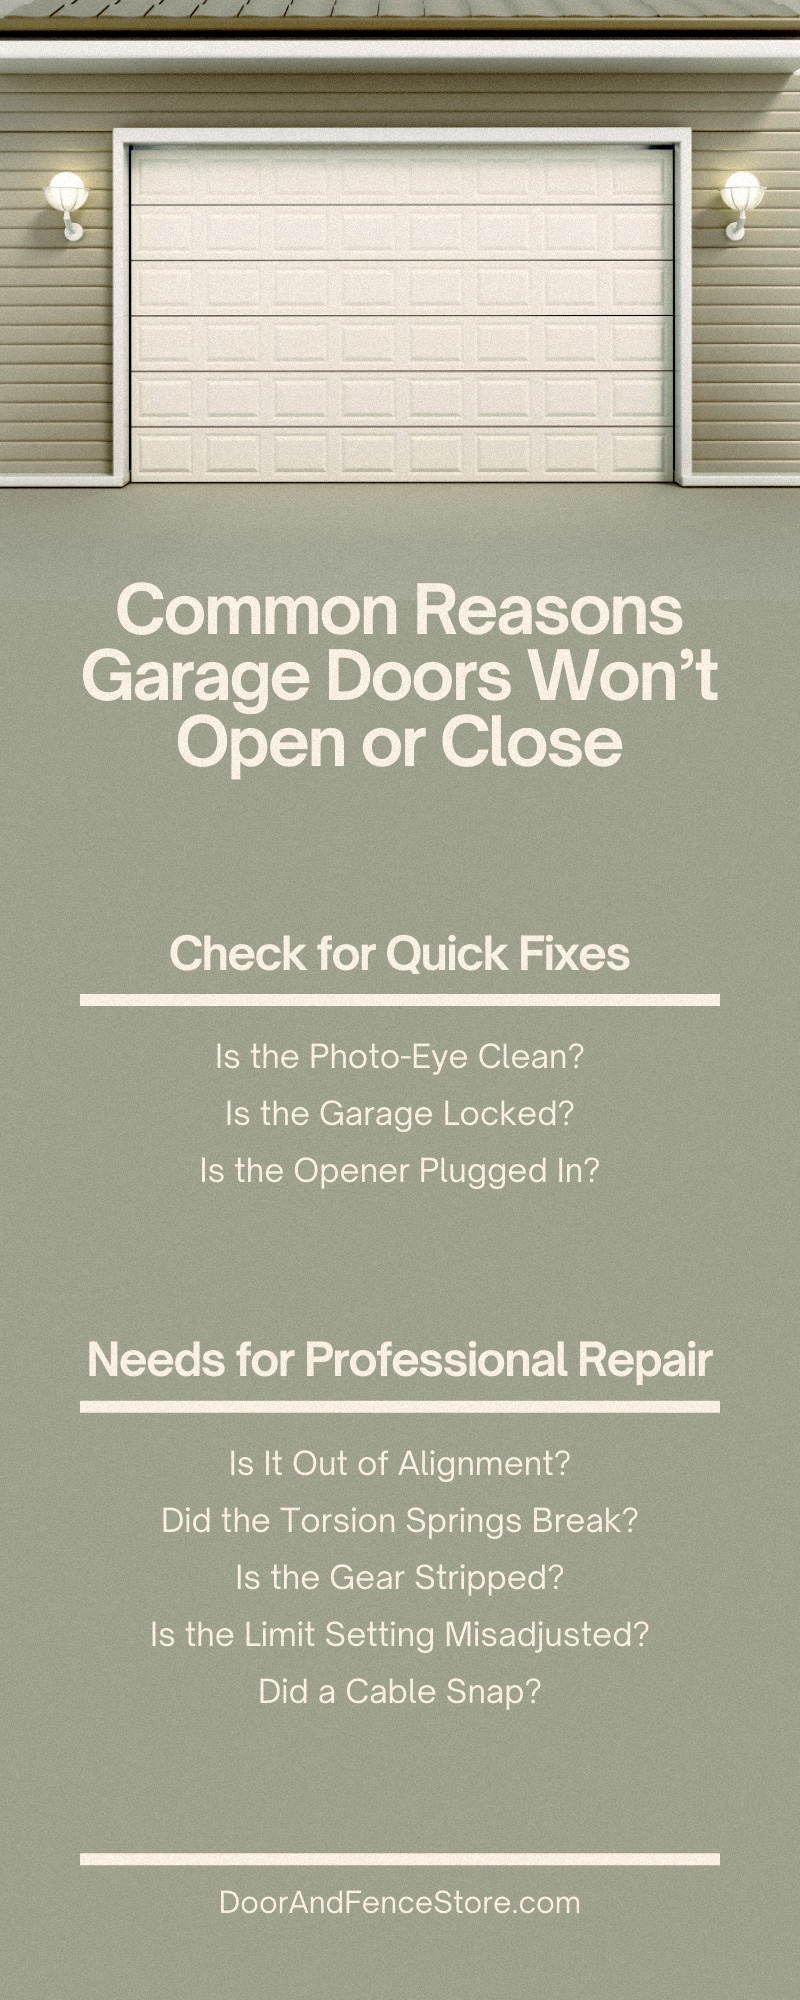 How to Diagnose a Garage Door Issue on Your Own